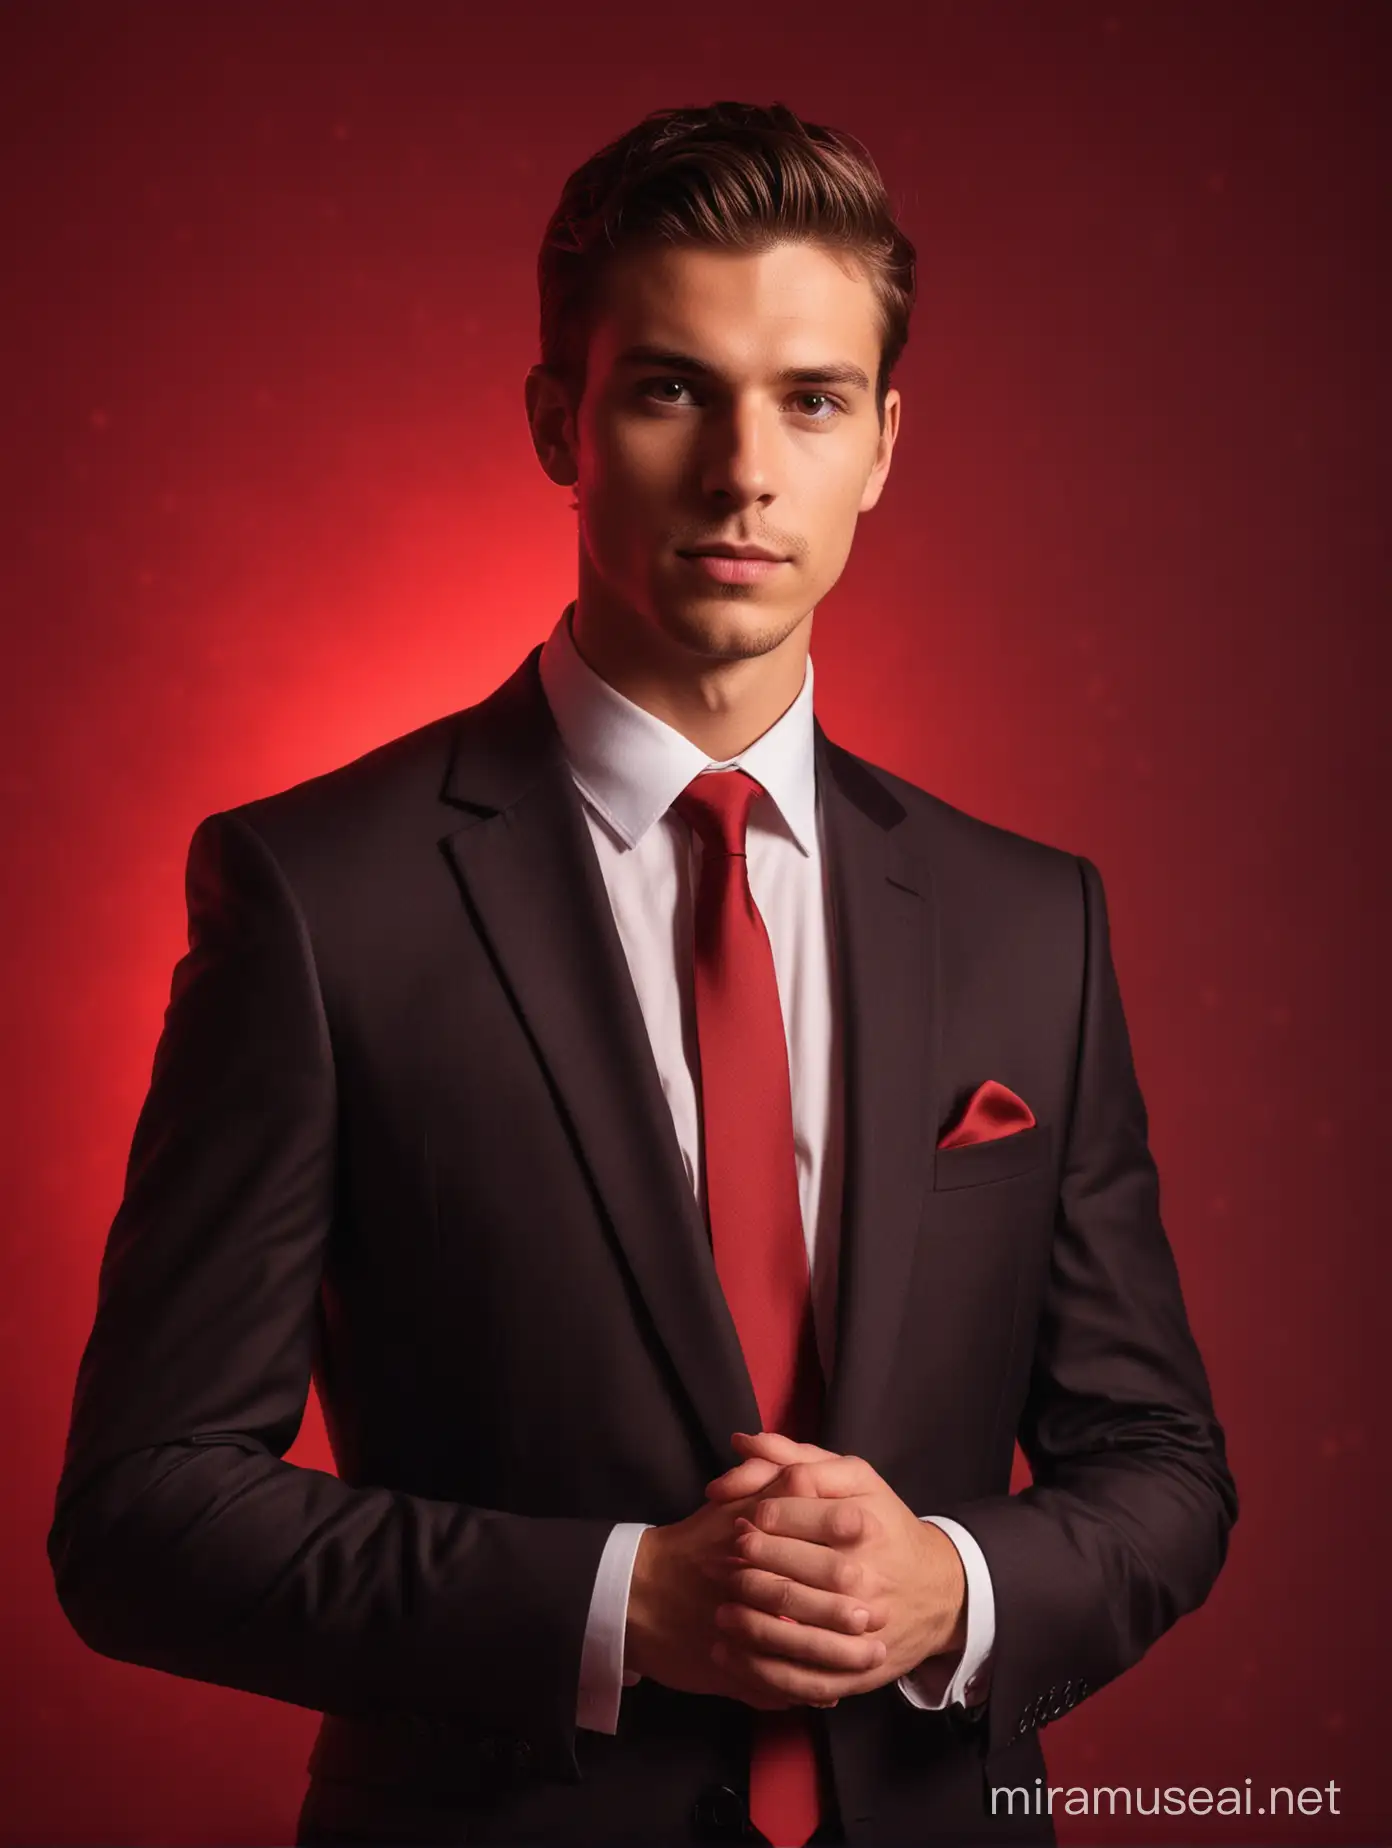 A handsome young man in suit standing with red luminous light behind him